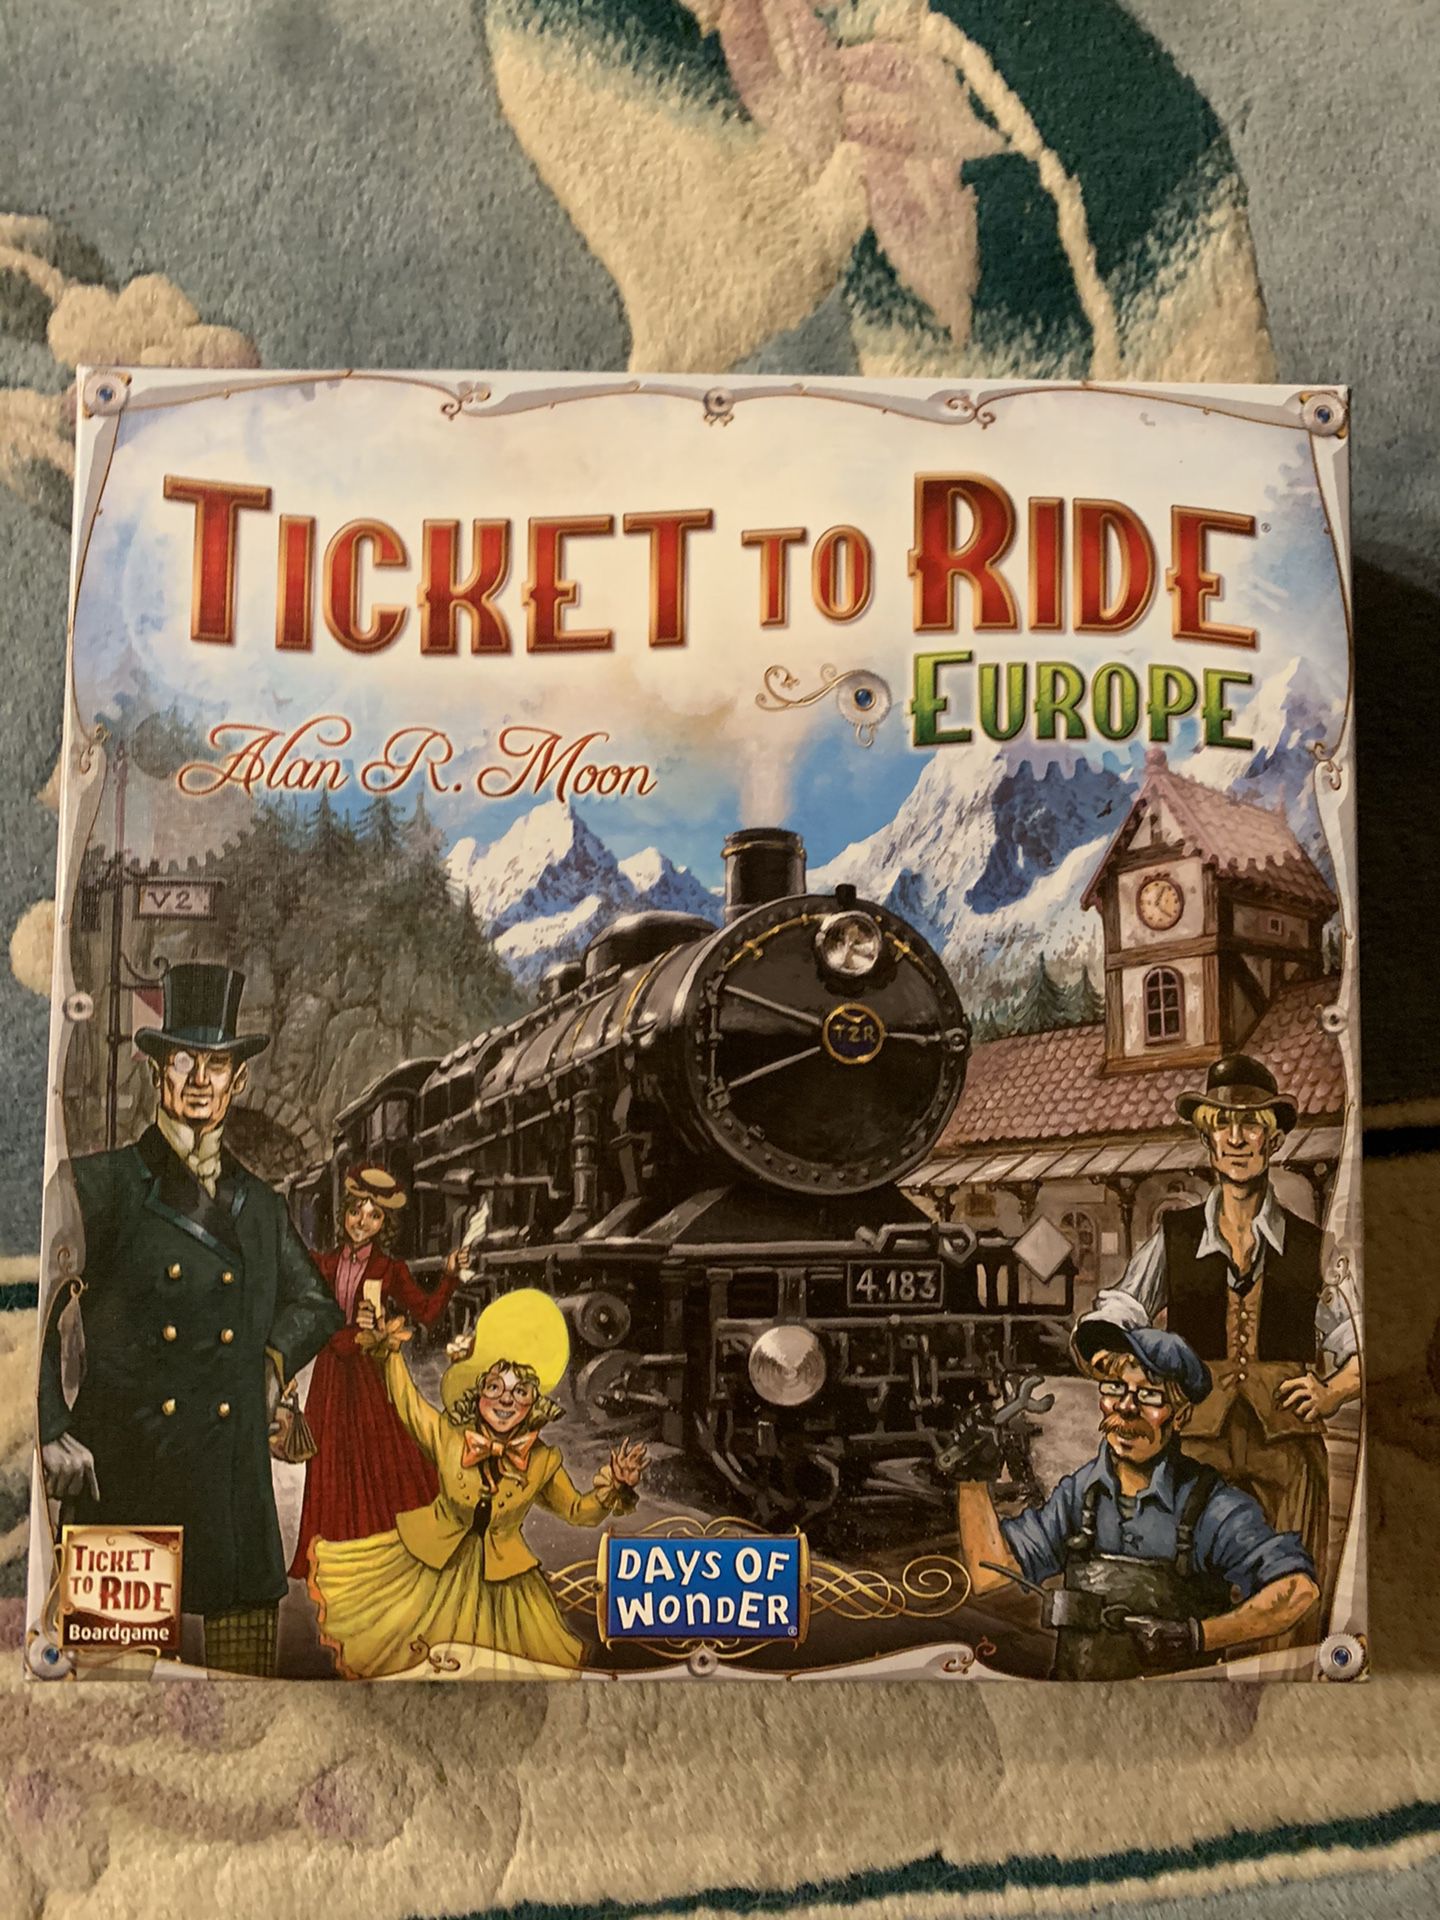 Ticket to ride Europe board game